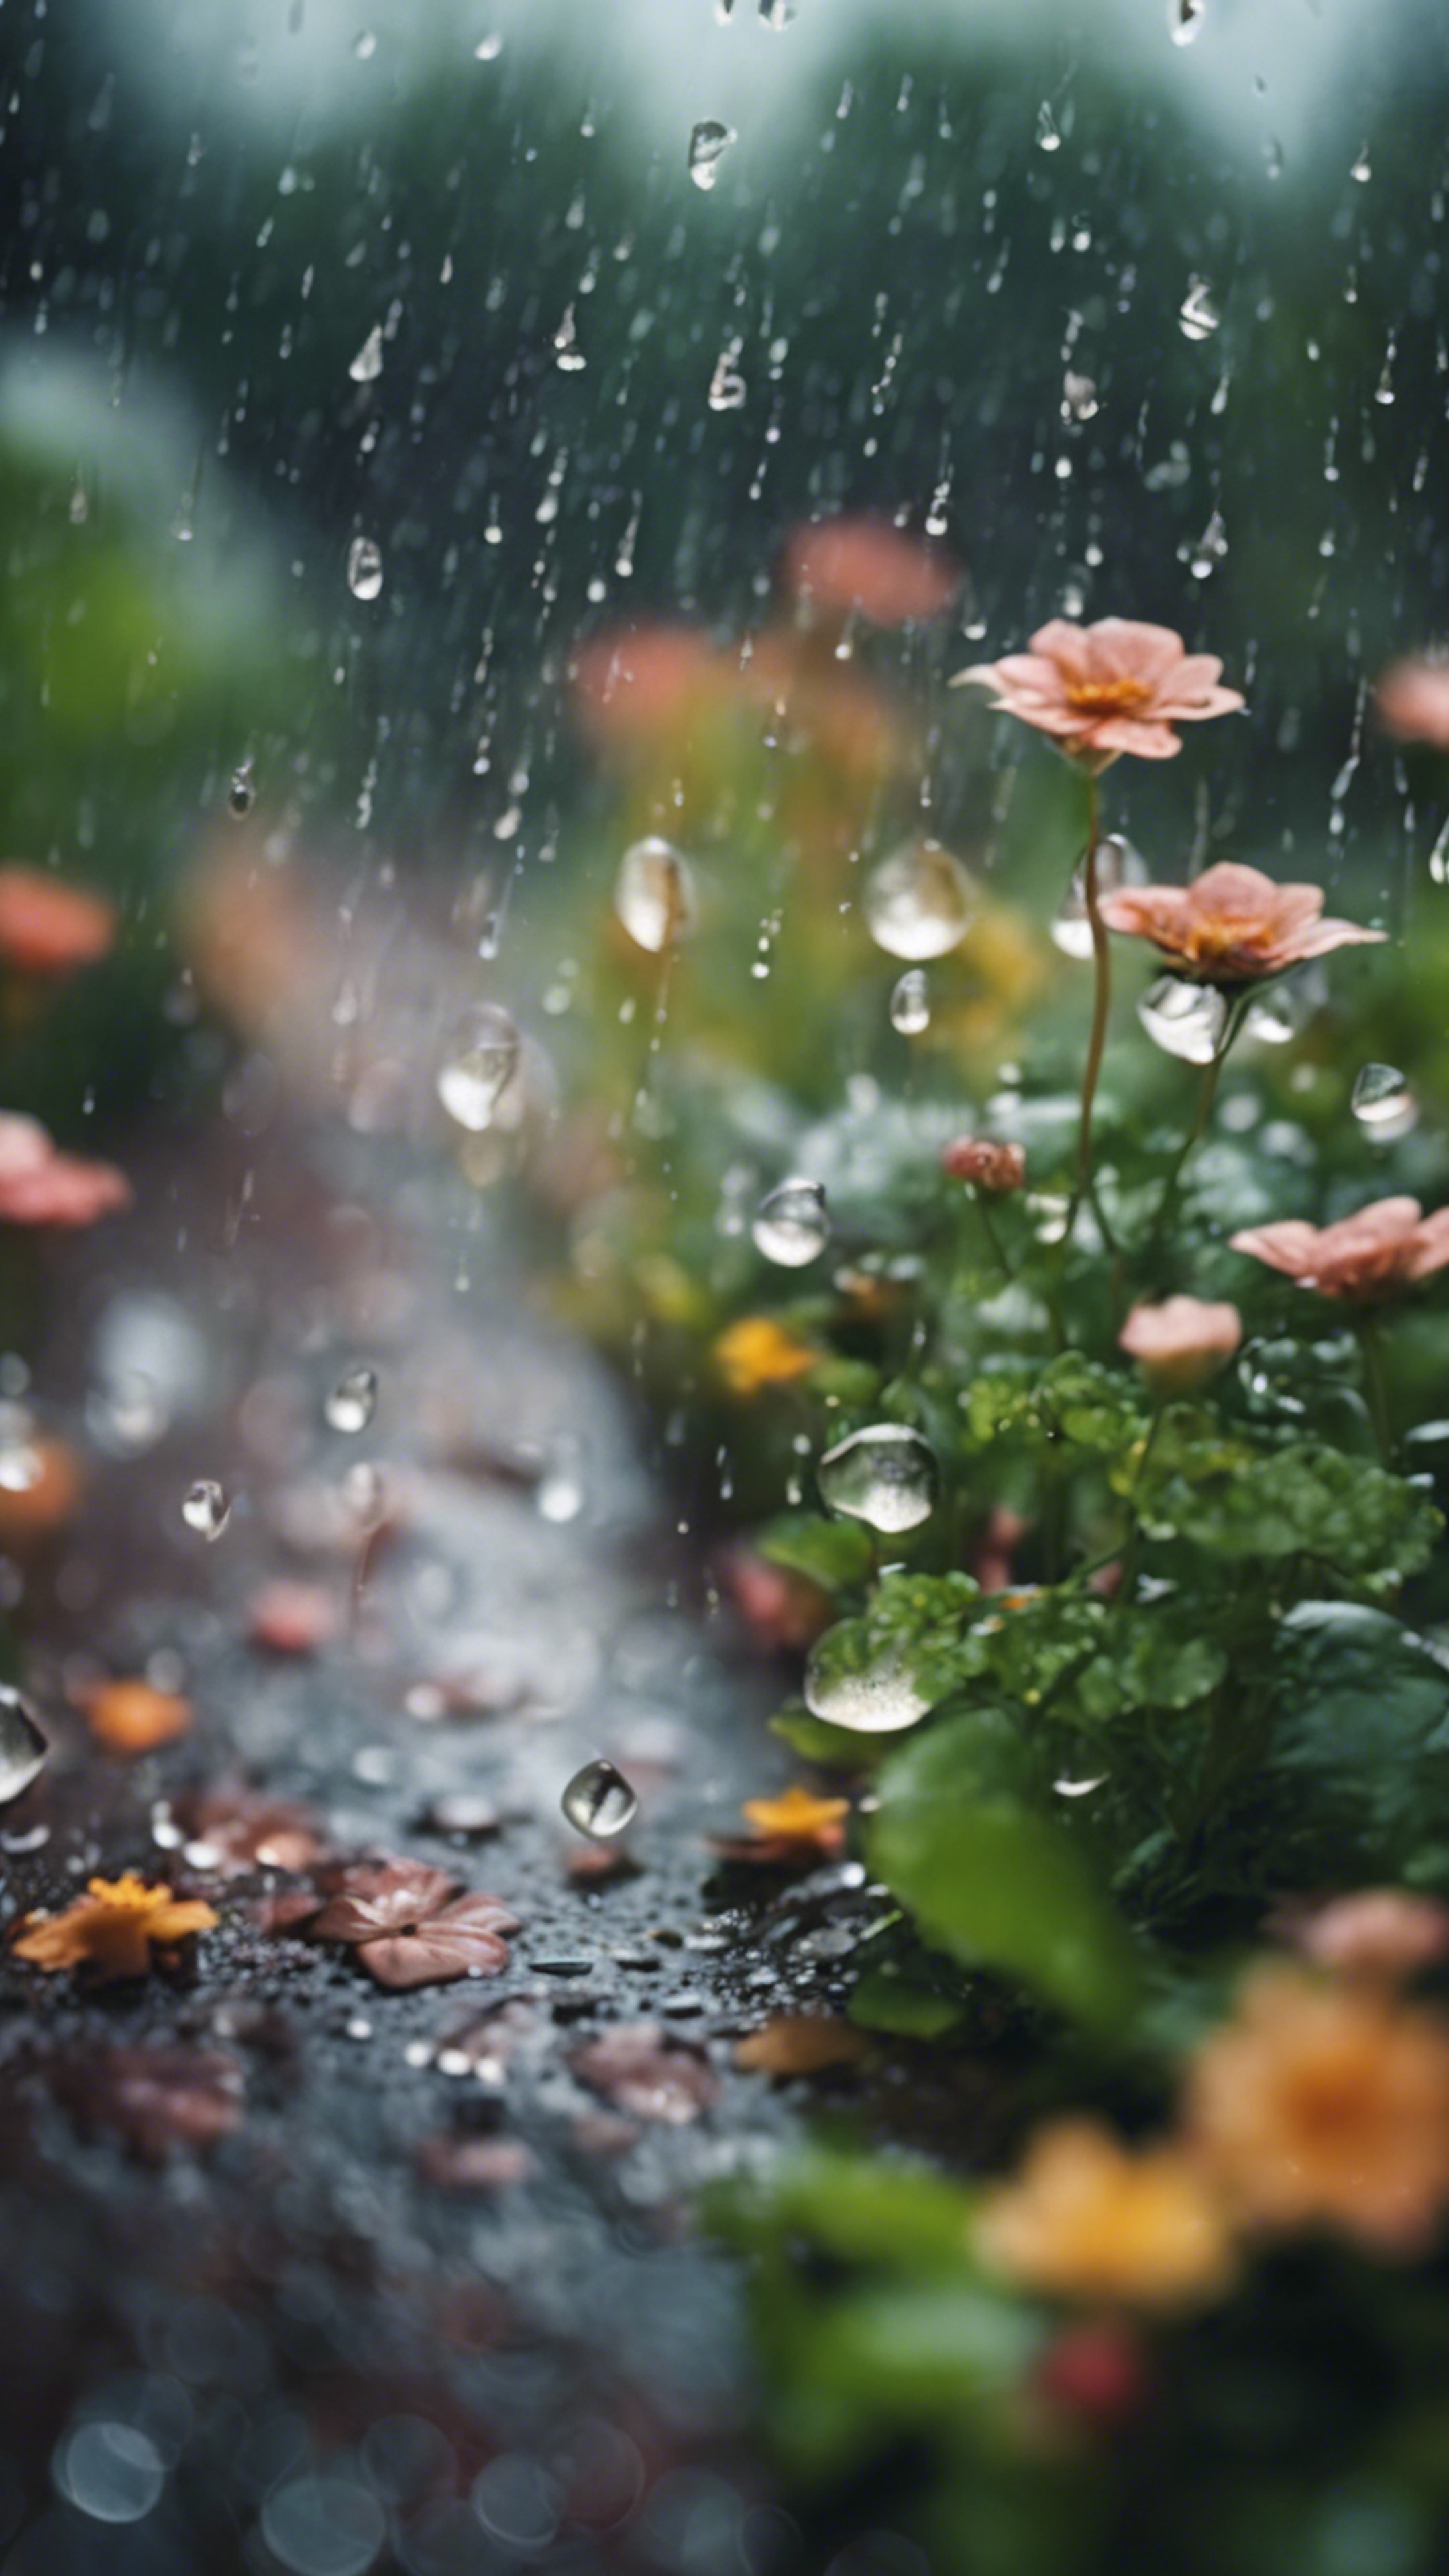 A tinkling rain garden during a soft rain shower, with raindrops dancing on the leaves and petals. วอลล์เปเปอร์[725596f4b8c5433598b7]